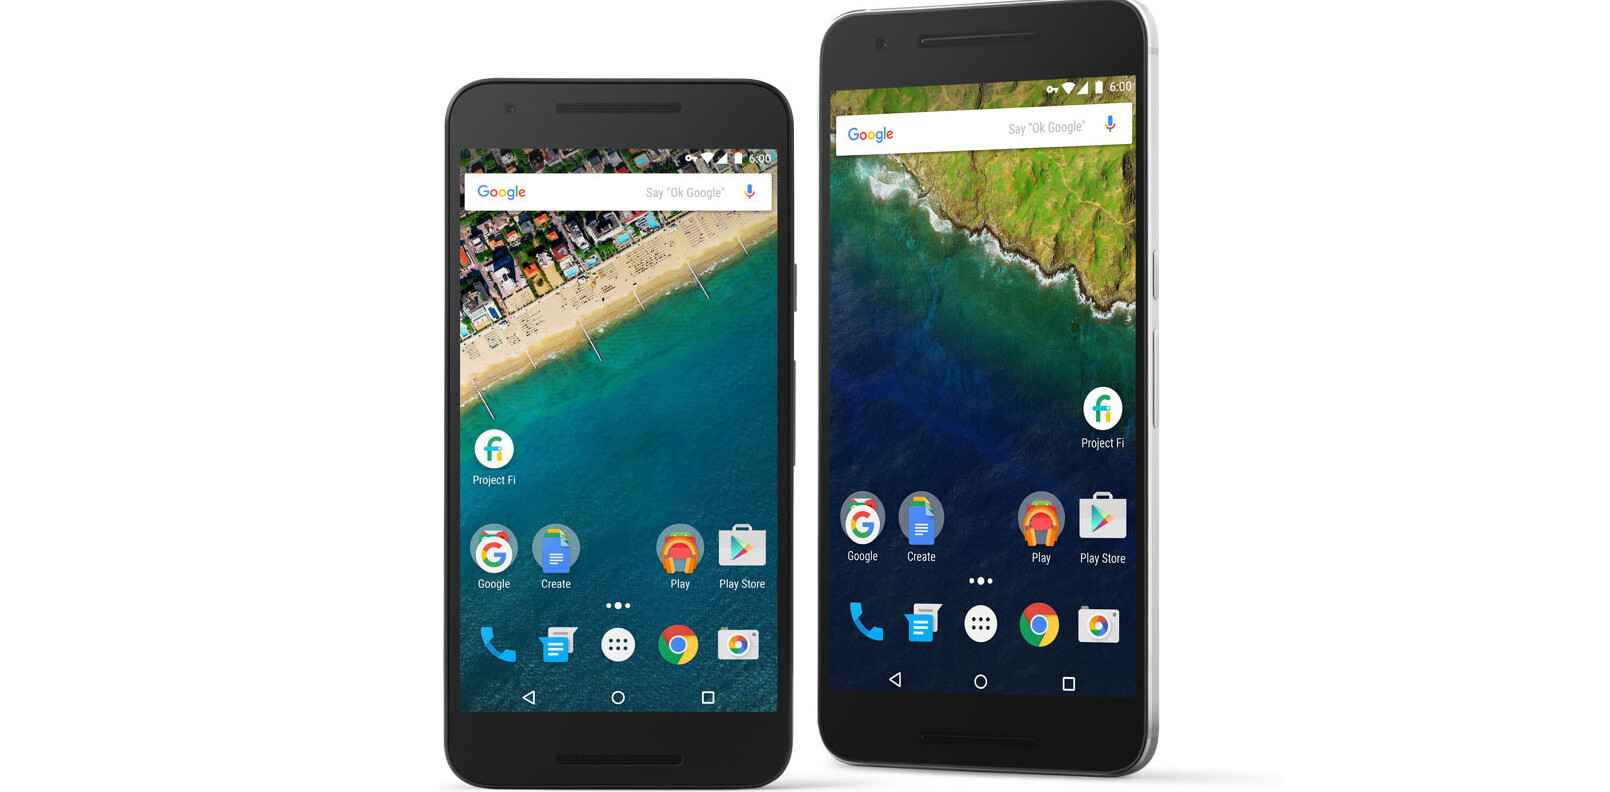 Google is rolling out a handy data-saving feature to all Nexus phones